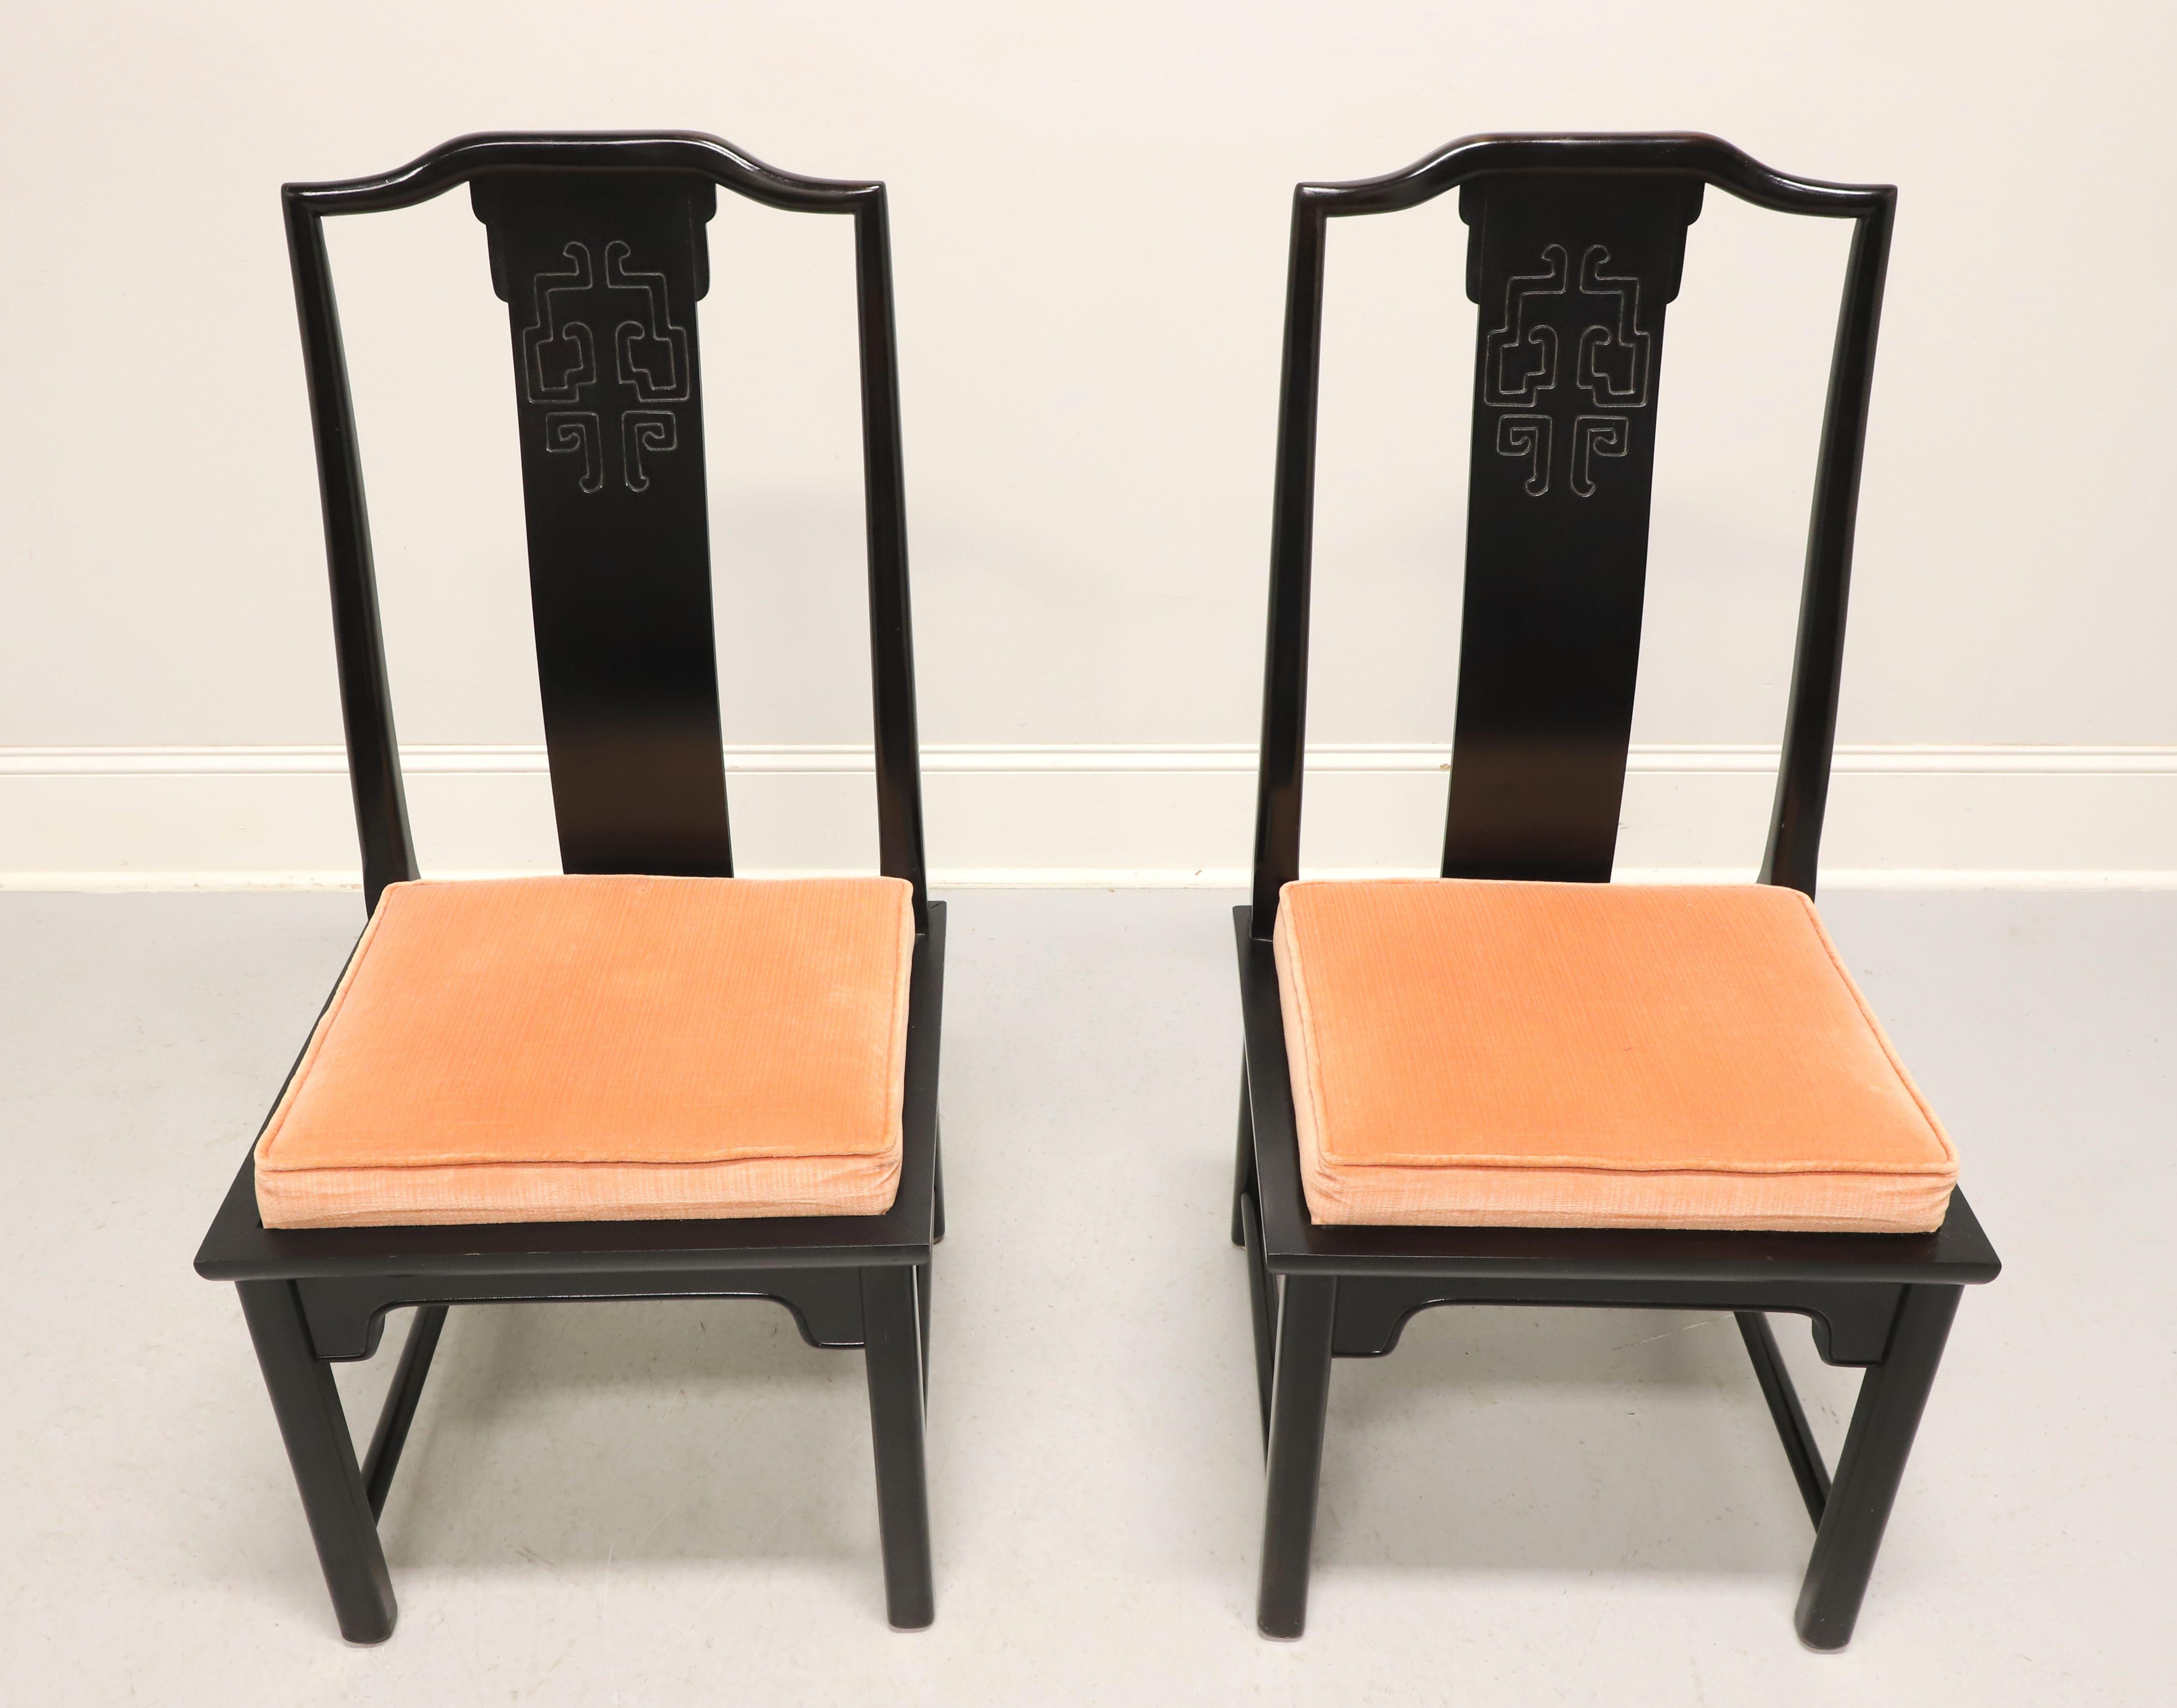 A pair of Asian Chinoiserie style dining side chairs by high-quality furniture maker Century. From their 